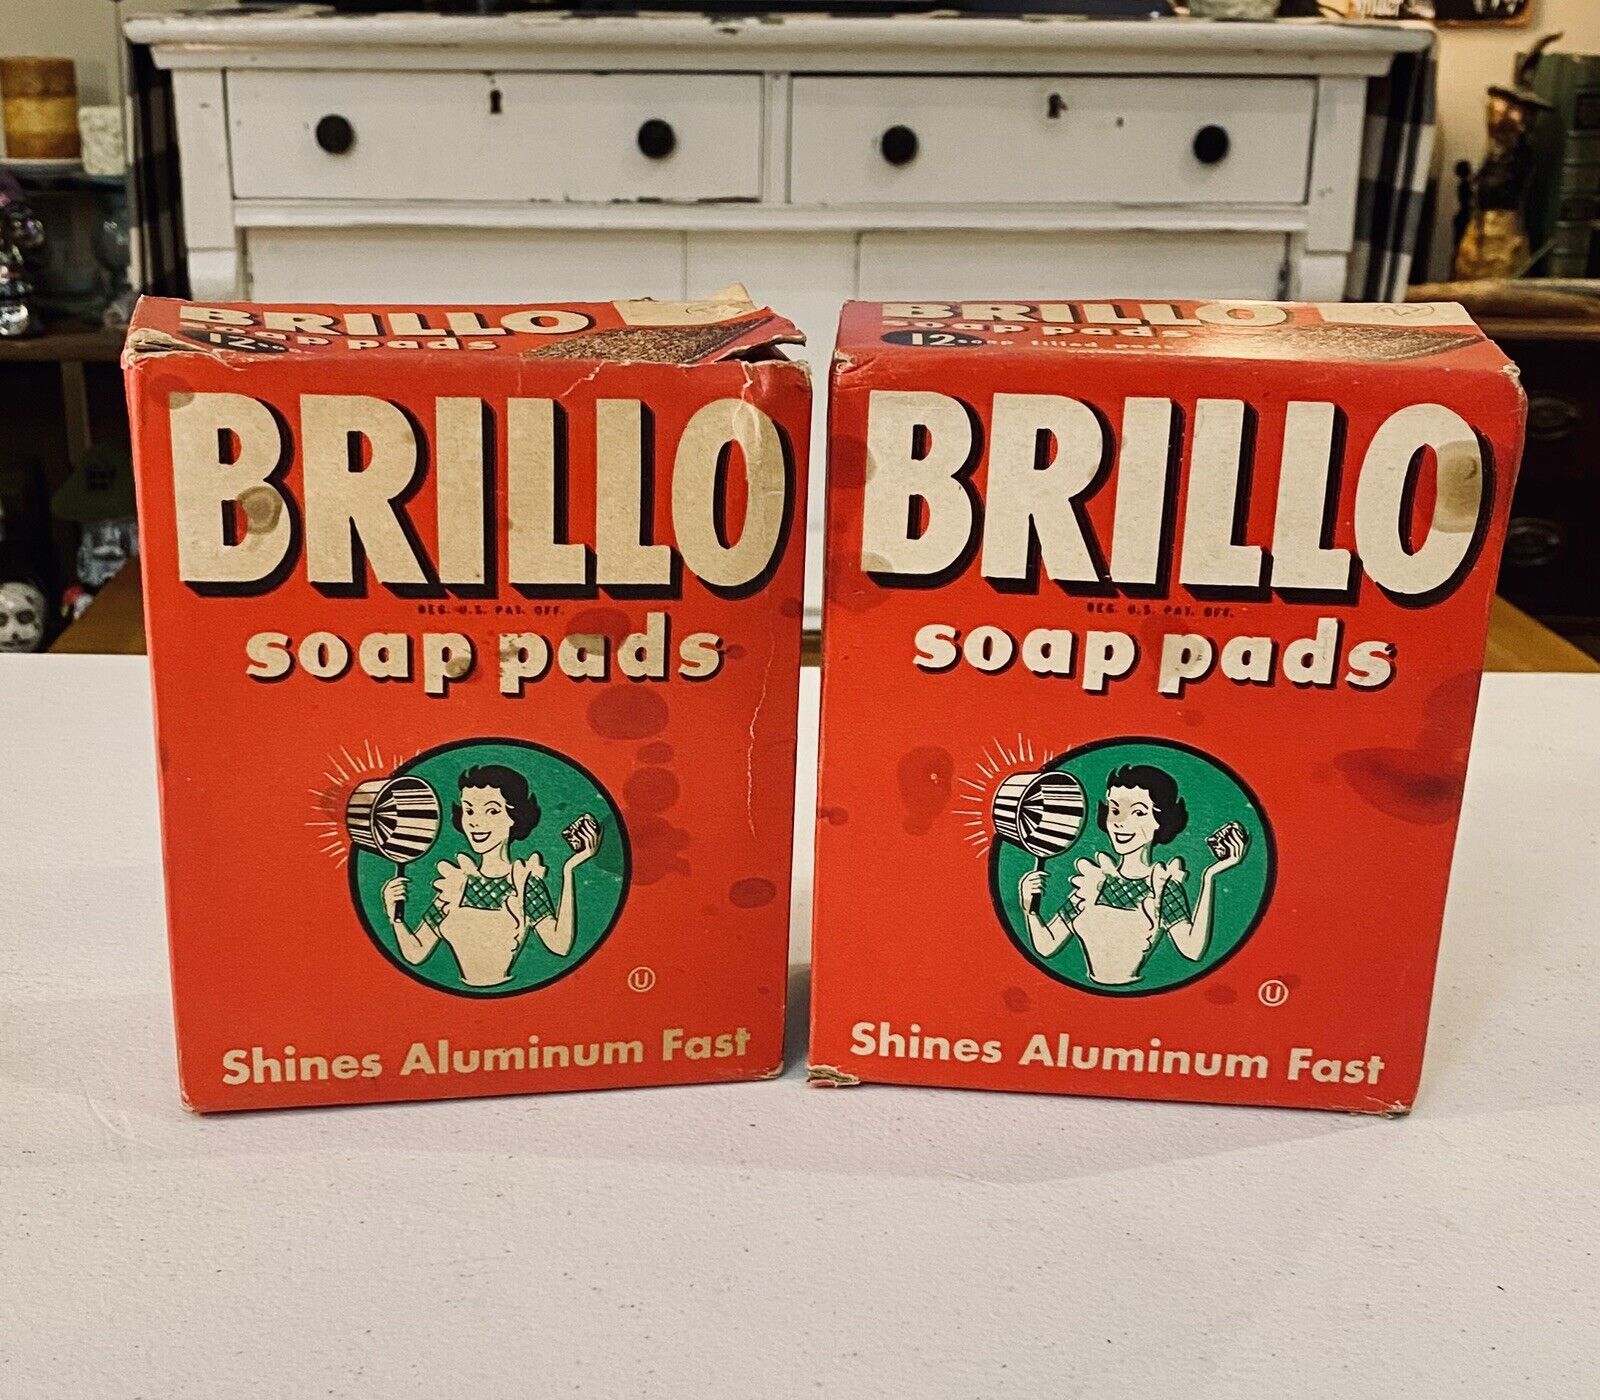 Vintage 1950s Brillo Soap Pads Lot of 2 Unopened Boxes - 12 Large Size per Box